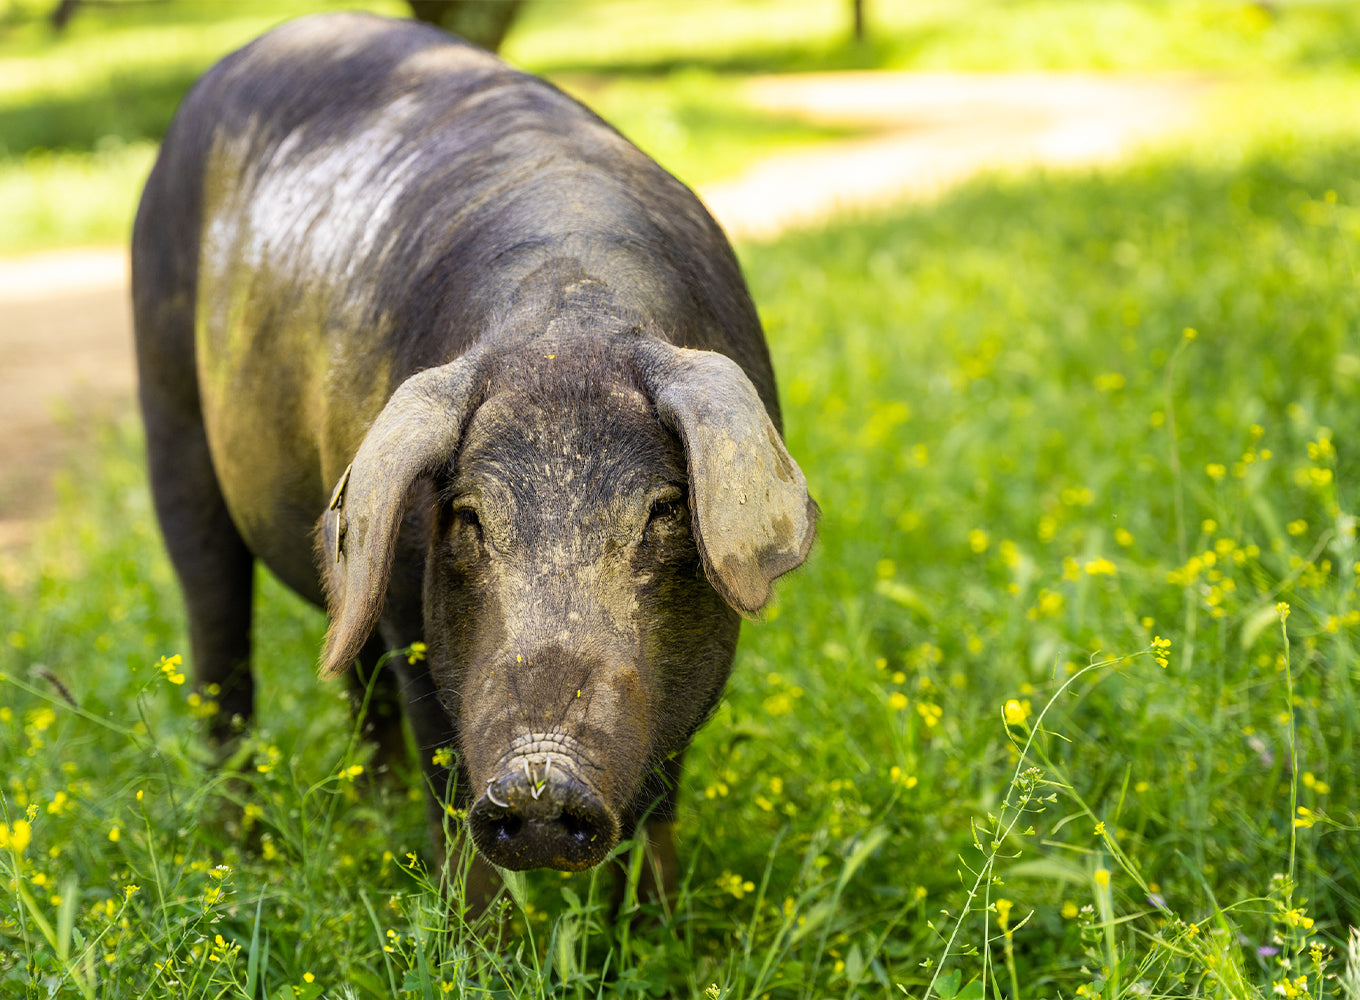 Iberian pig grazing in the field